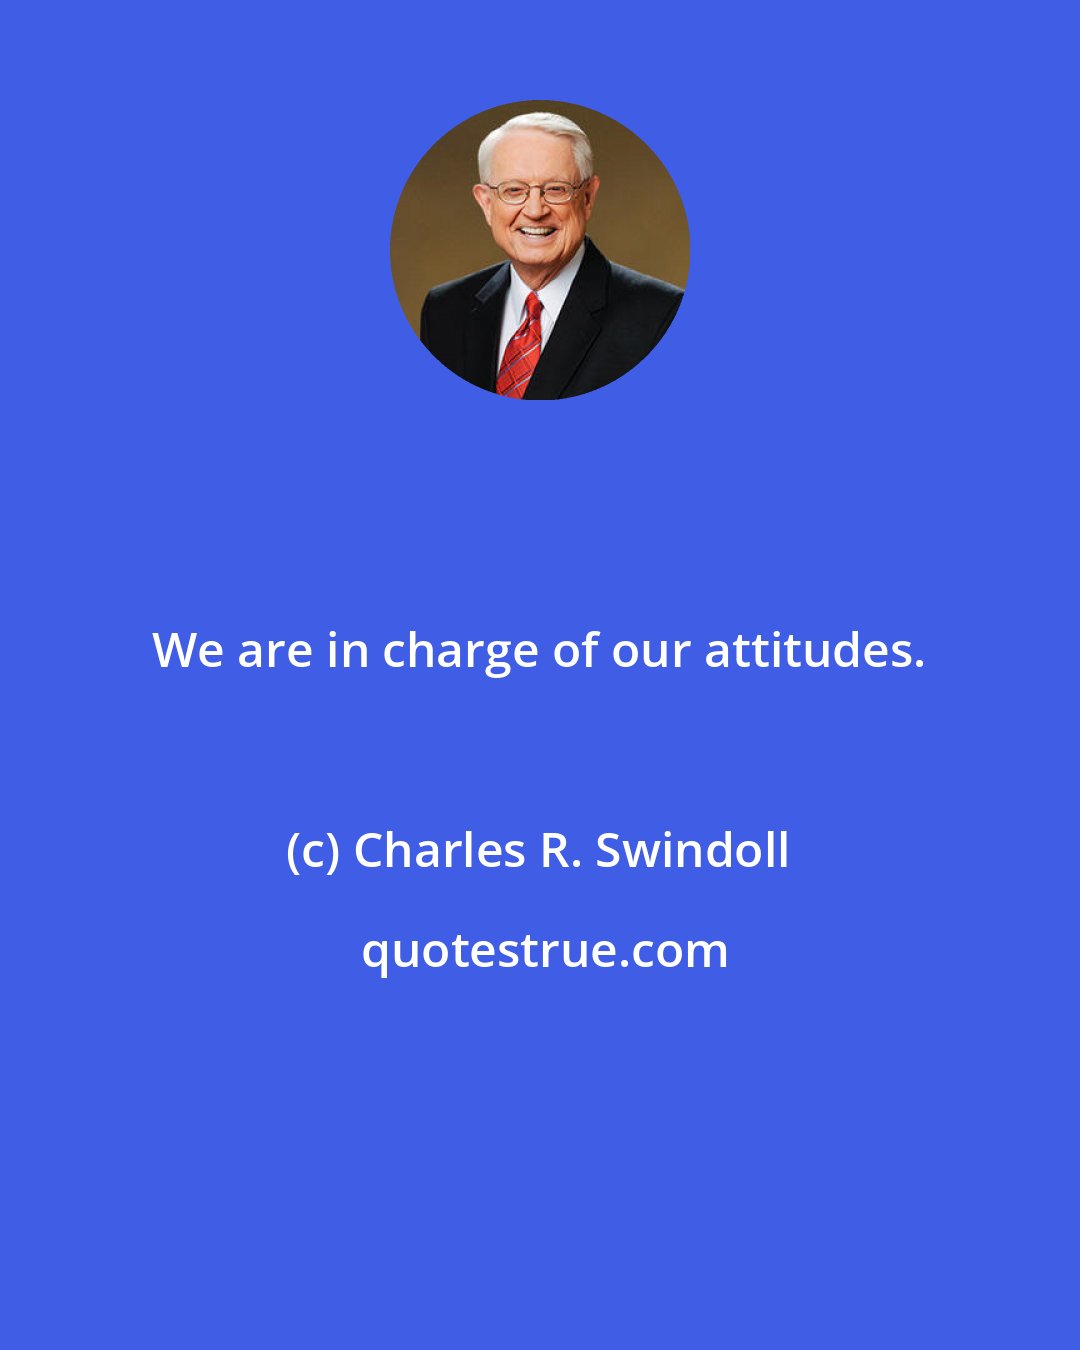 Charles R. Swindoll: We are in charge of our attitudes.